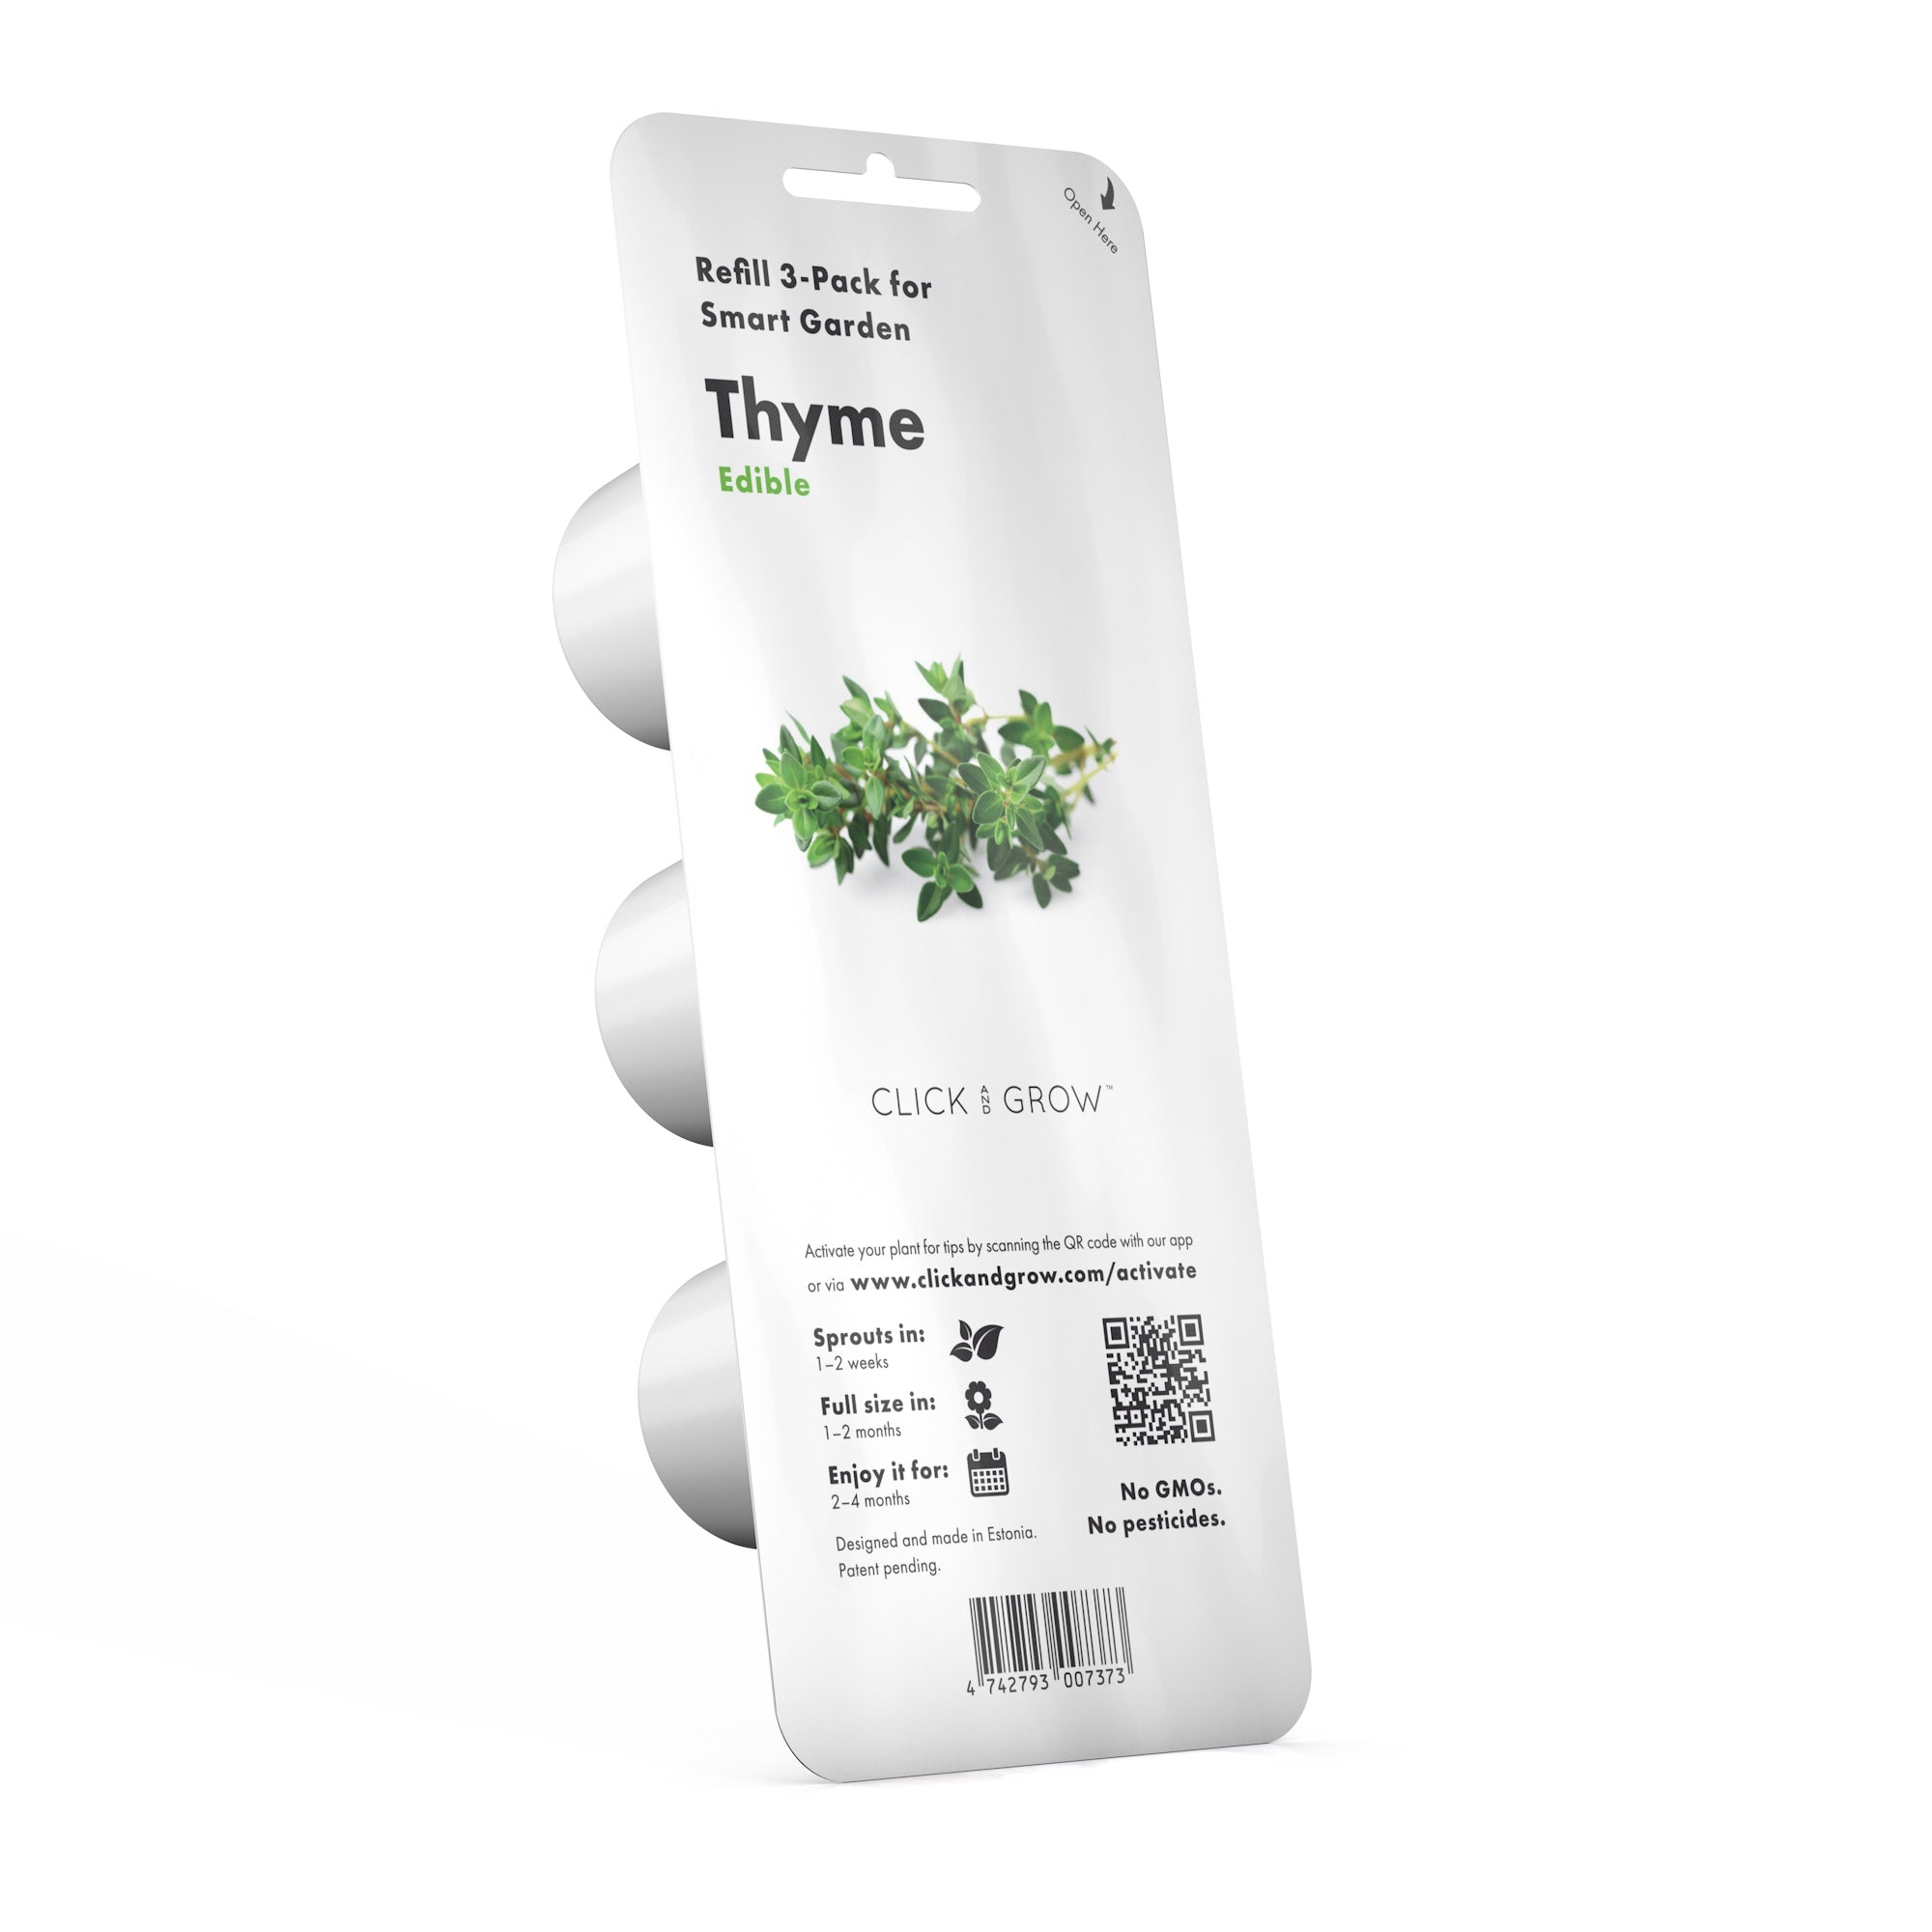 How to Plant and Grow Thyme